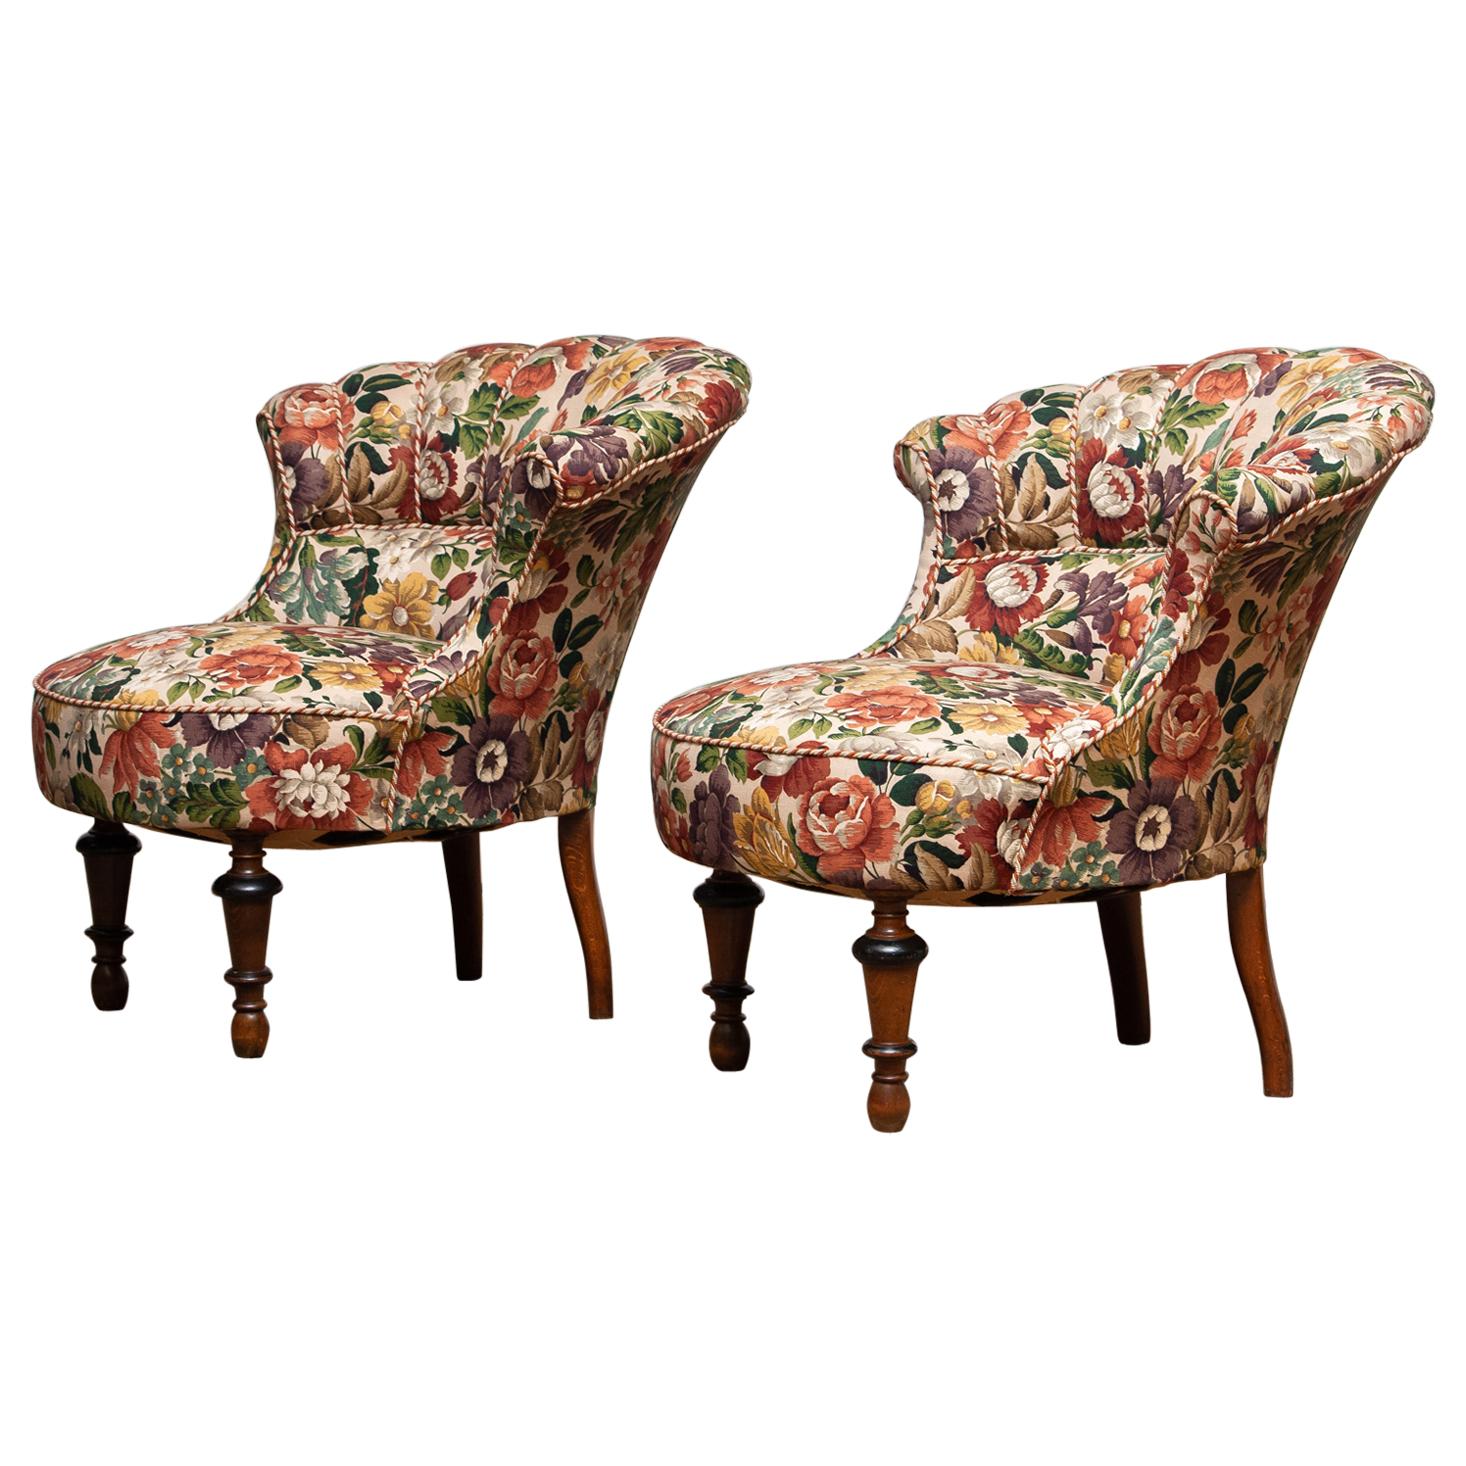 Beautiful and completely restored set of two, French Napoleon III slipper chairs from the 19th century, covered with floral printed fabric.
New fabric, bindings, springs.
The overall condition of these two chairs is very good!